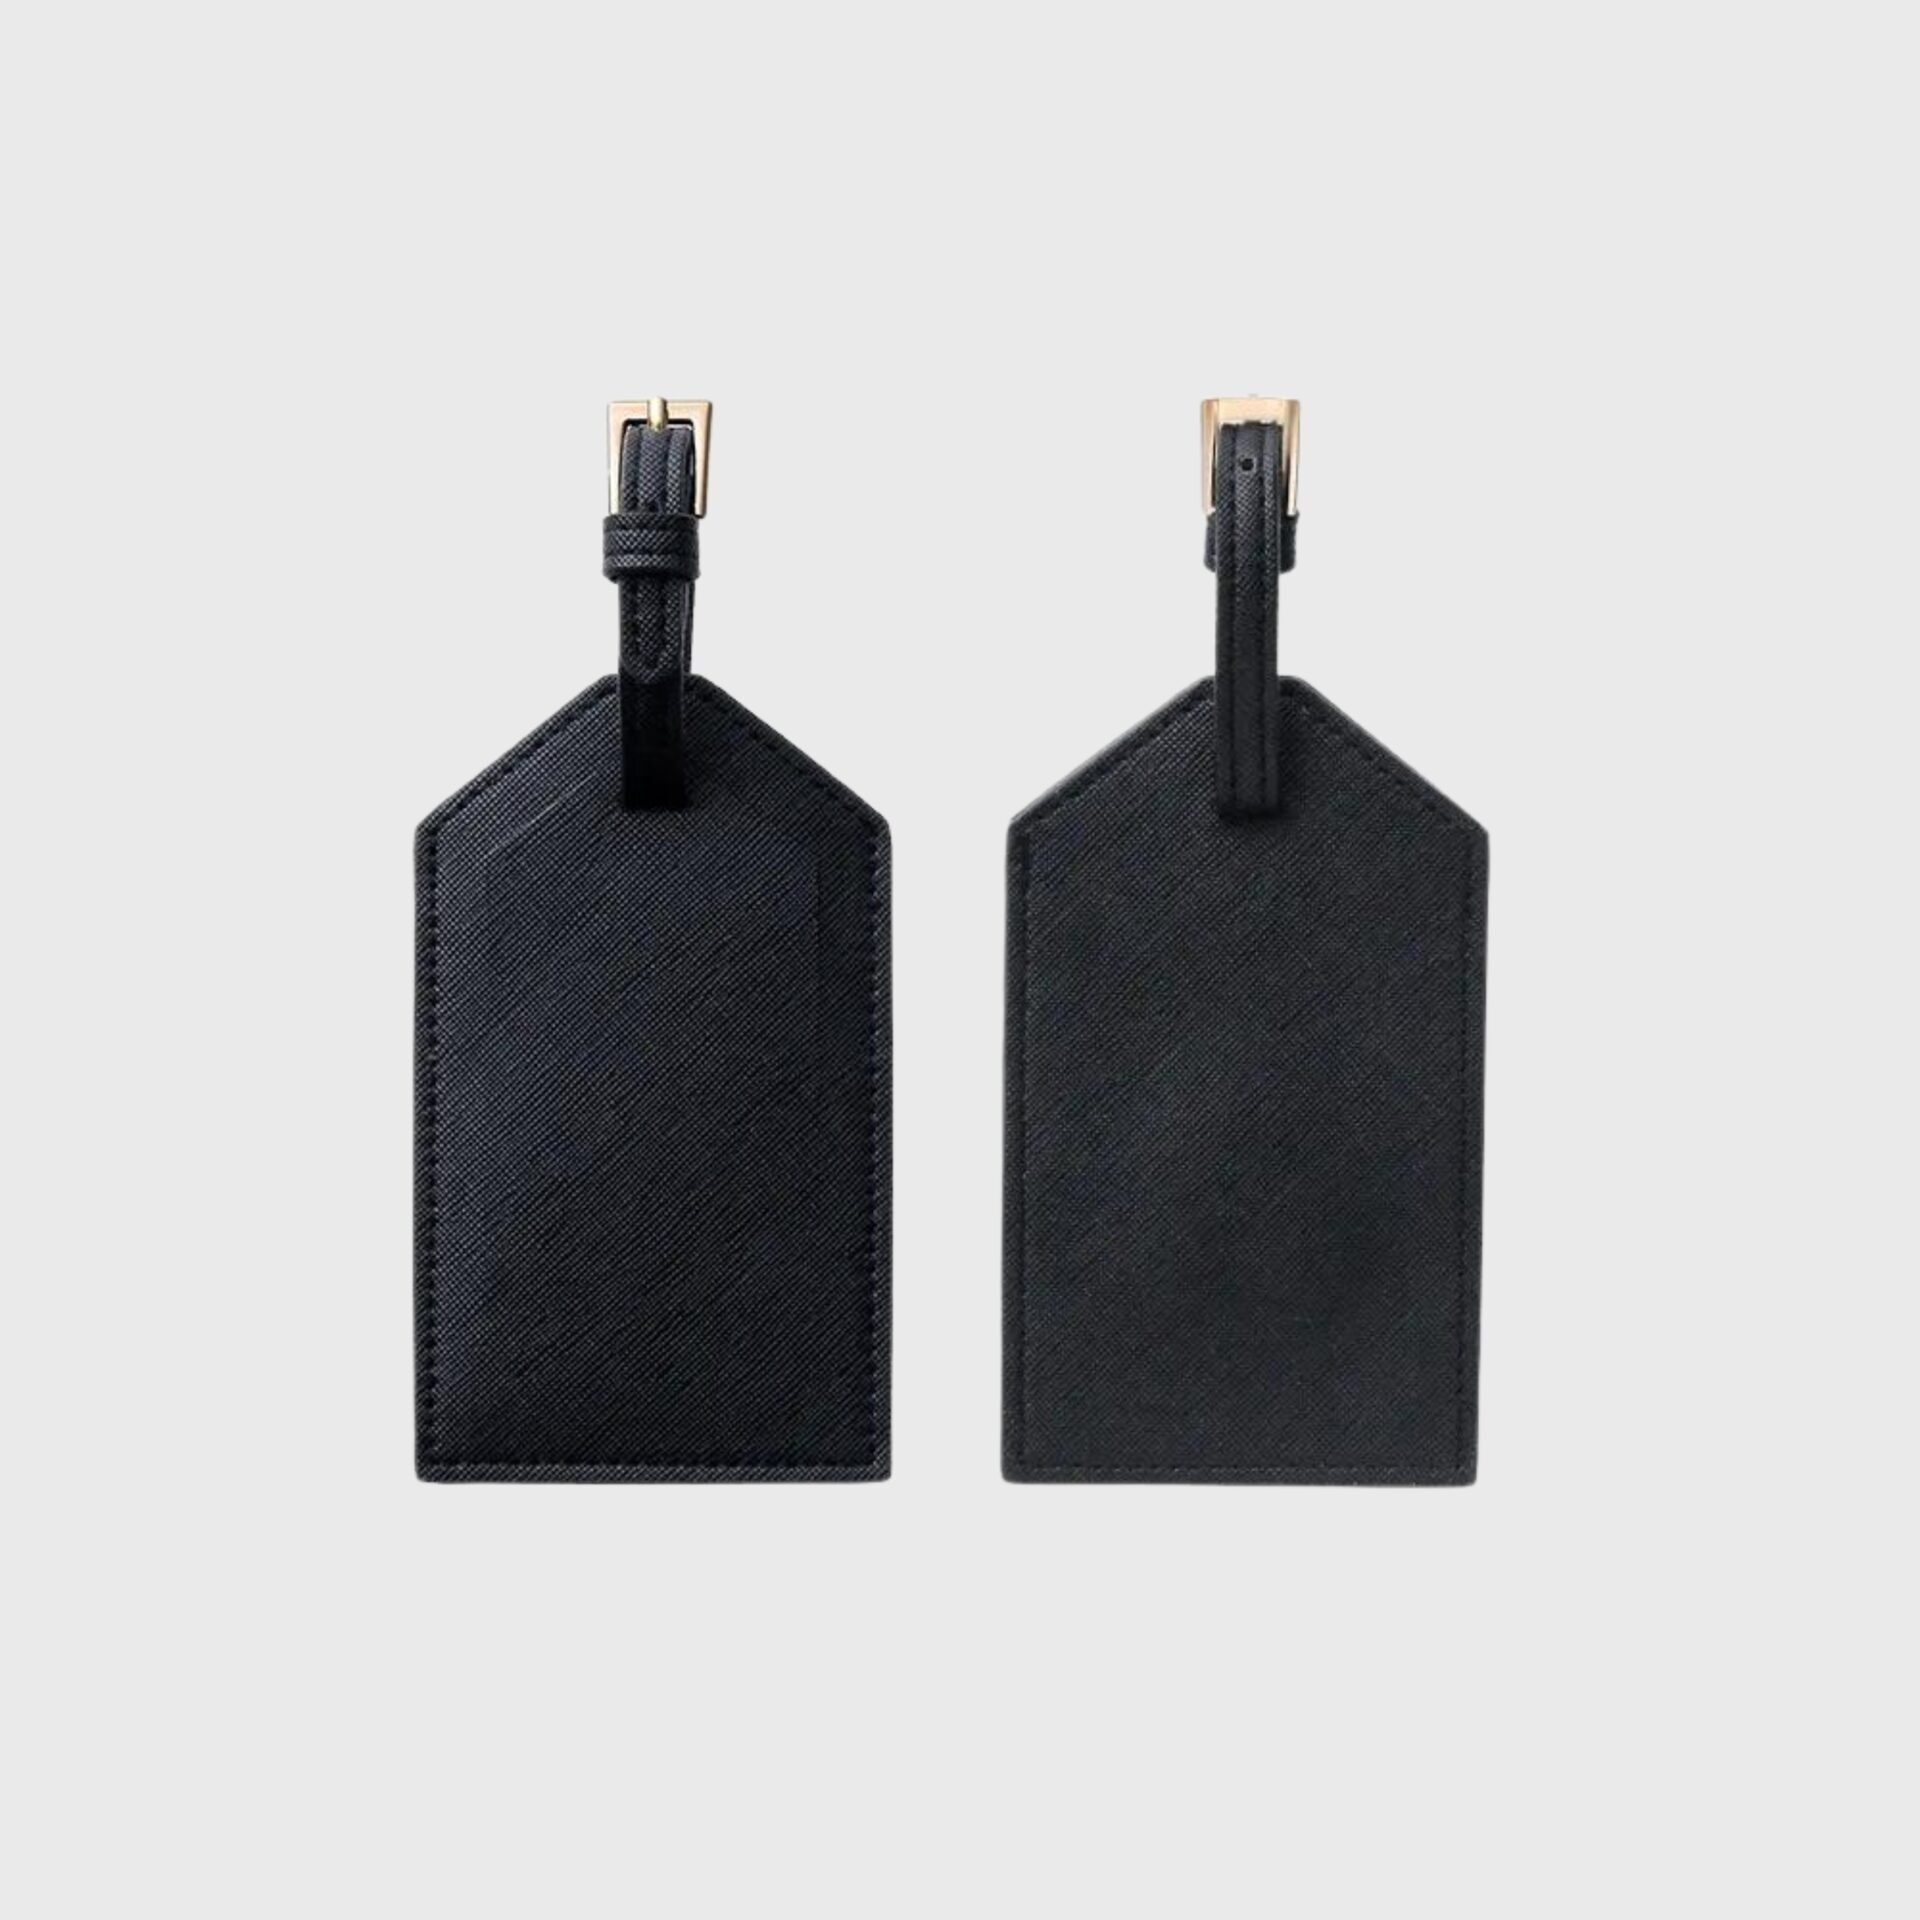 Odos Pisteuo and Co. Luggage Tag Black Corporate Gifts Singapore